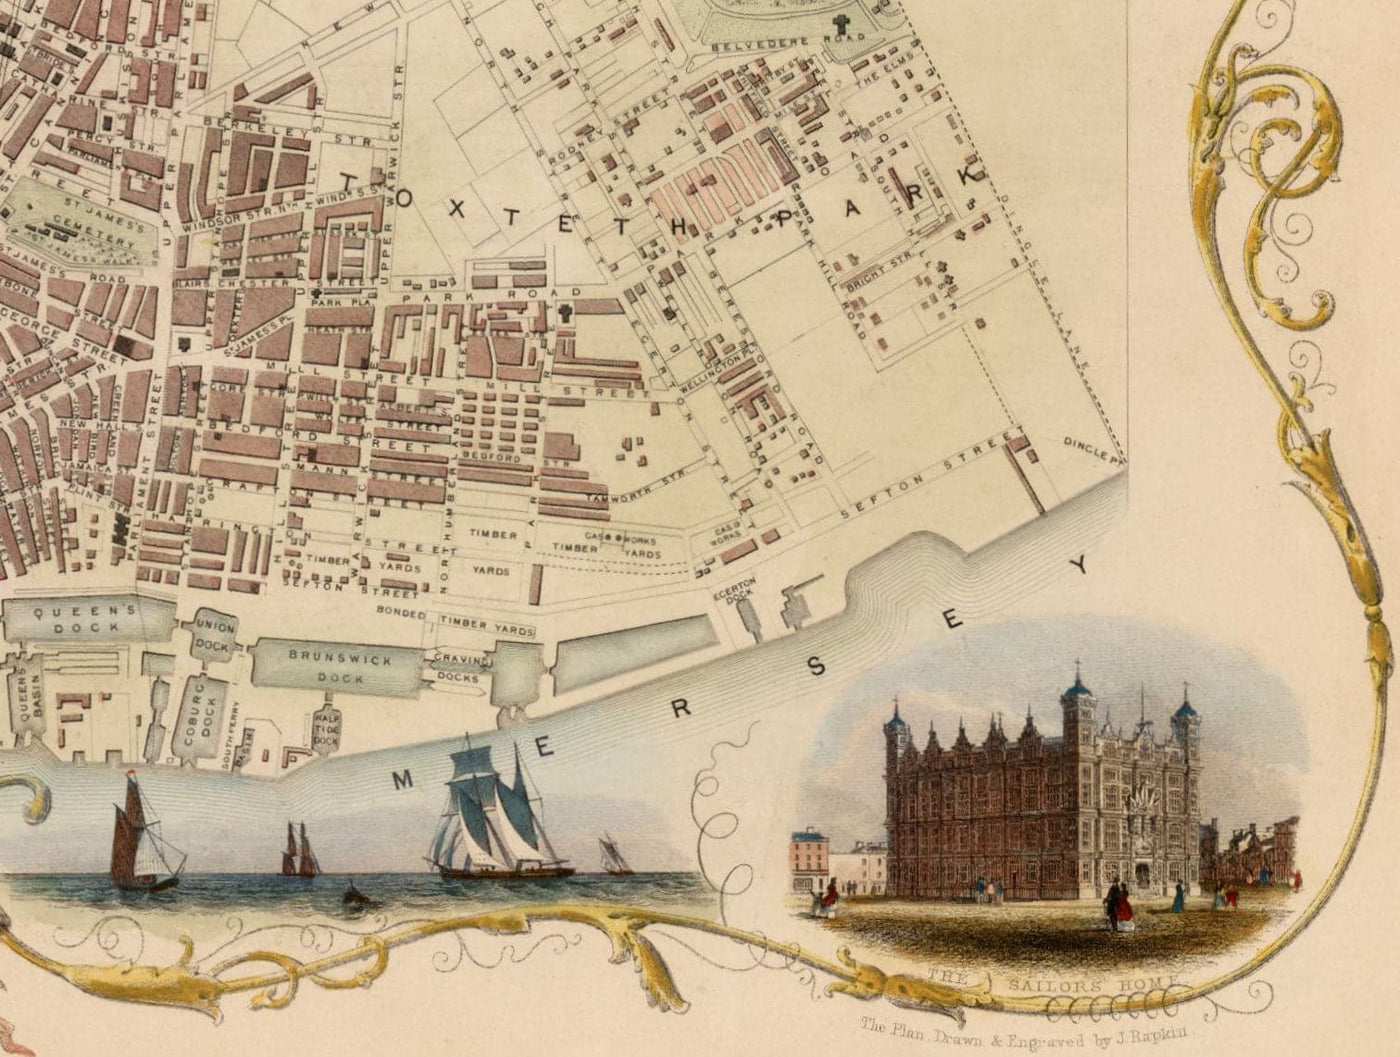 Old Colour Map of Liverpool by Tallis & Rapkin, 1851 - Docks, Mersey, City Centre